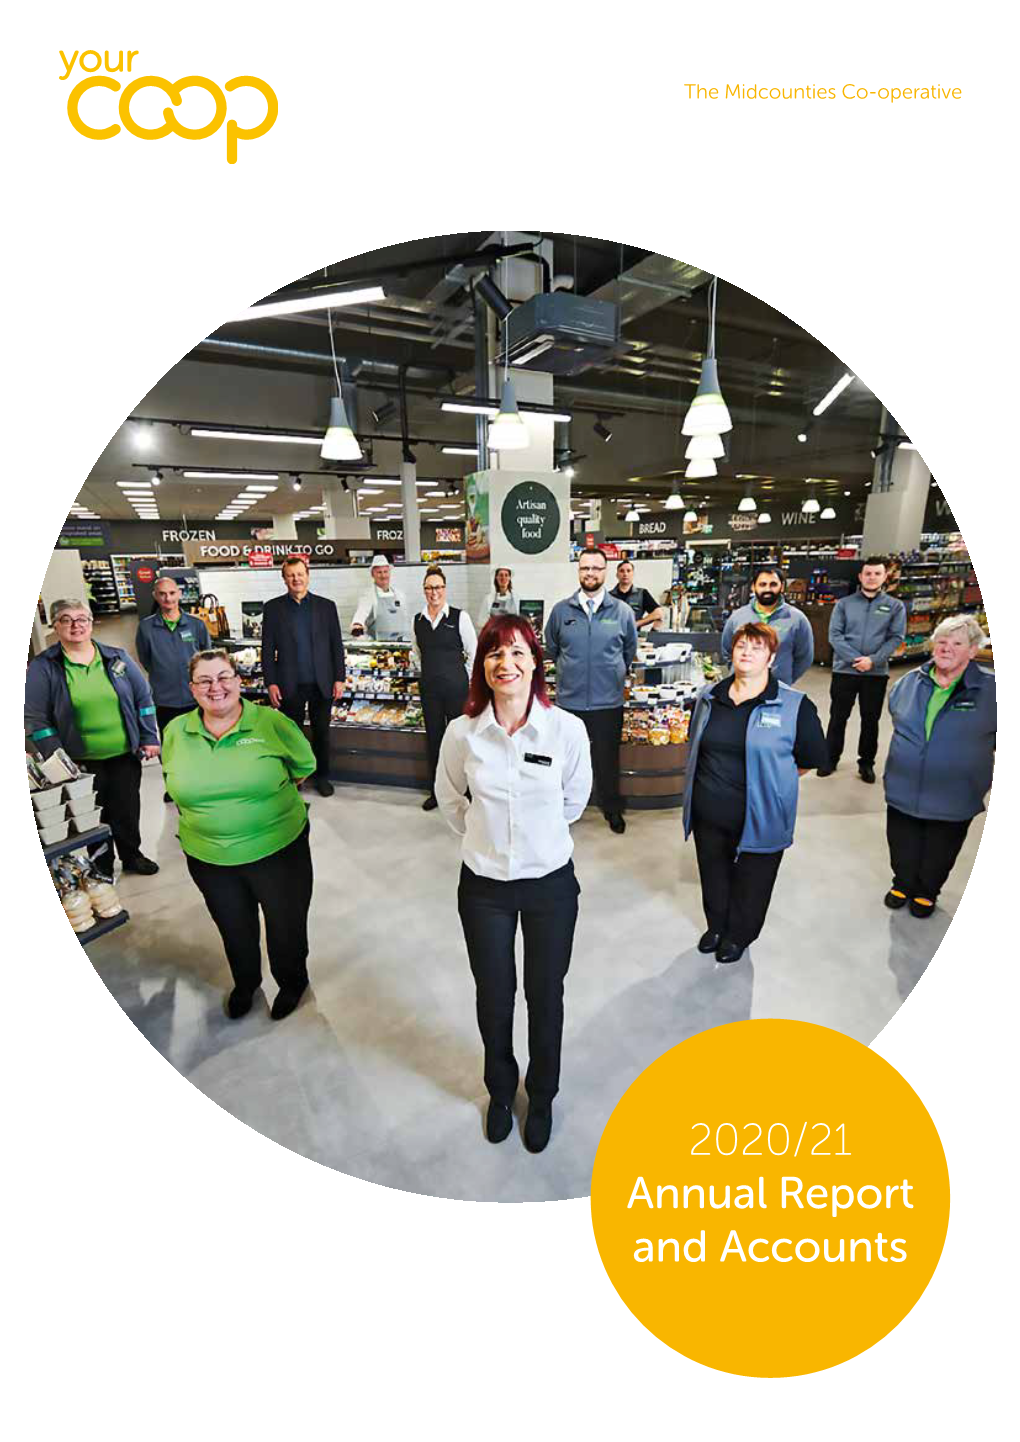 2020/21 Annual Report and Accounts Contents